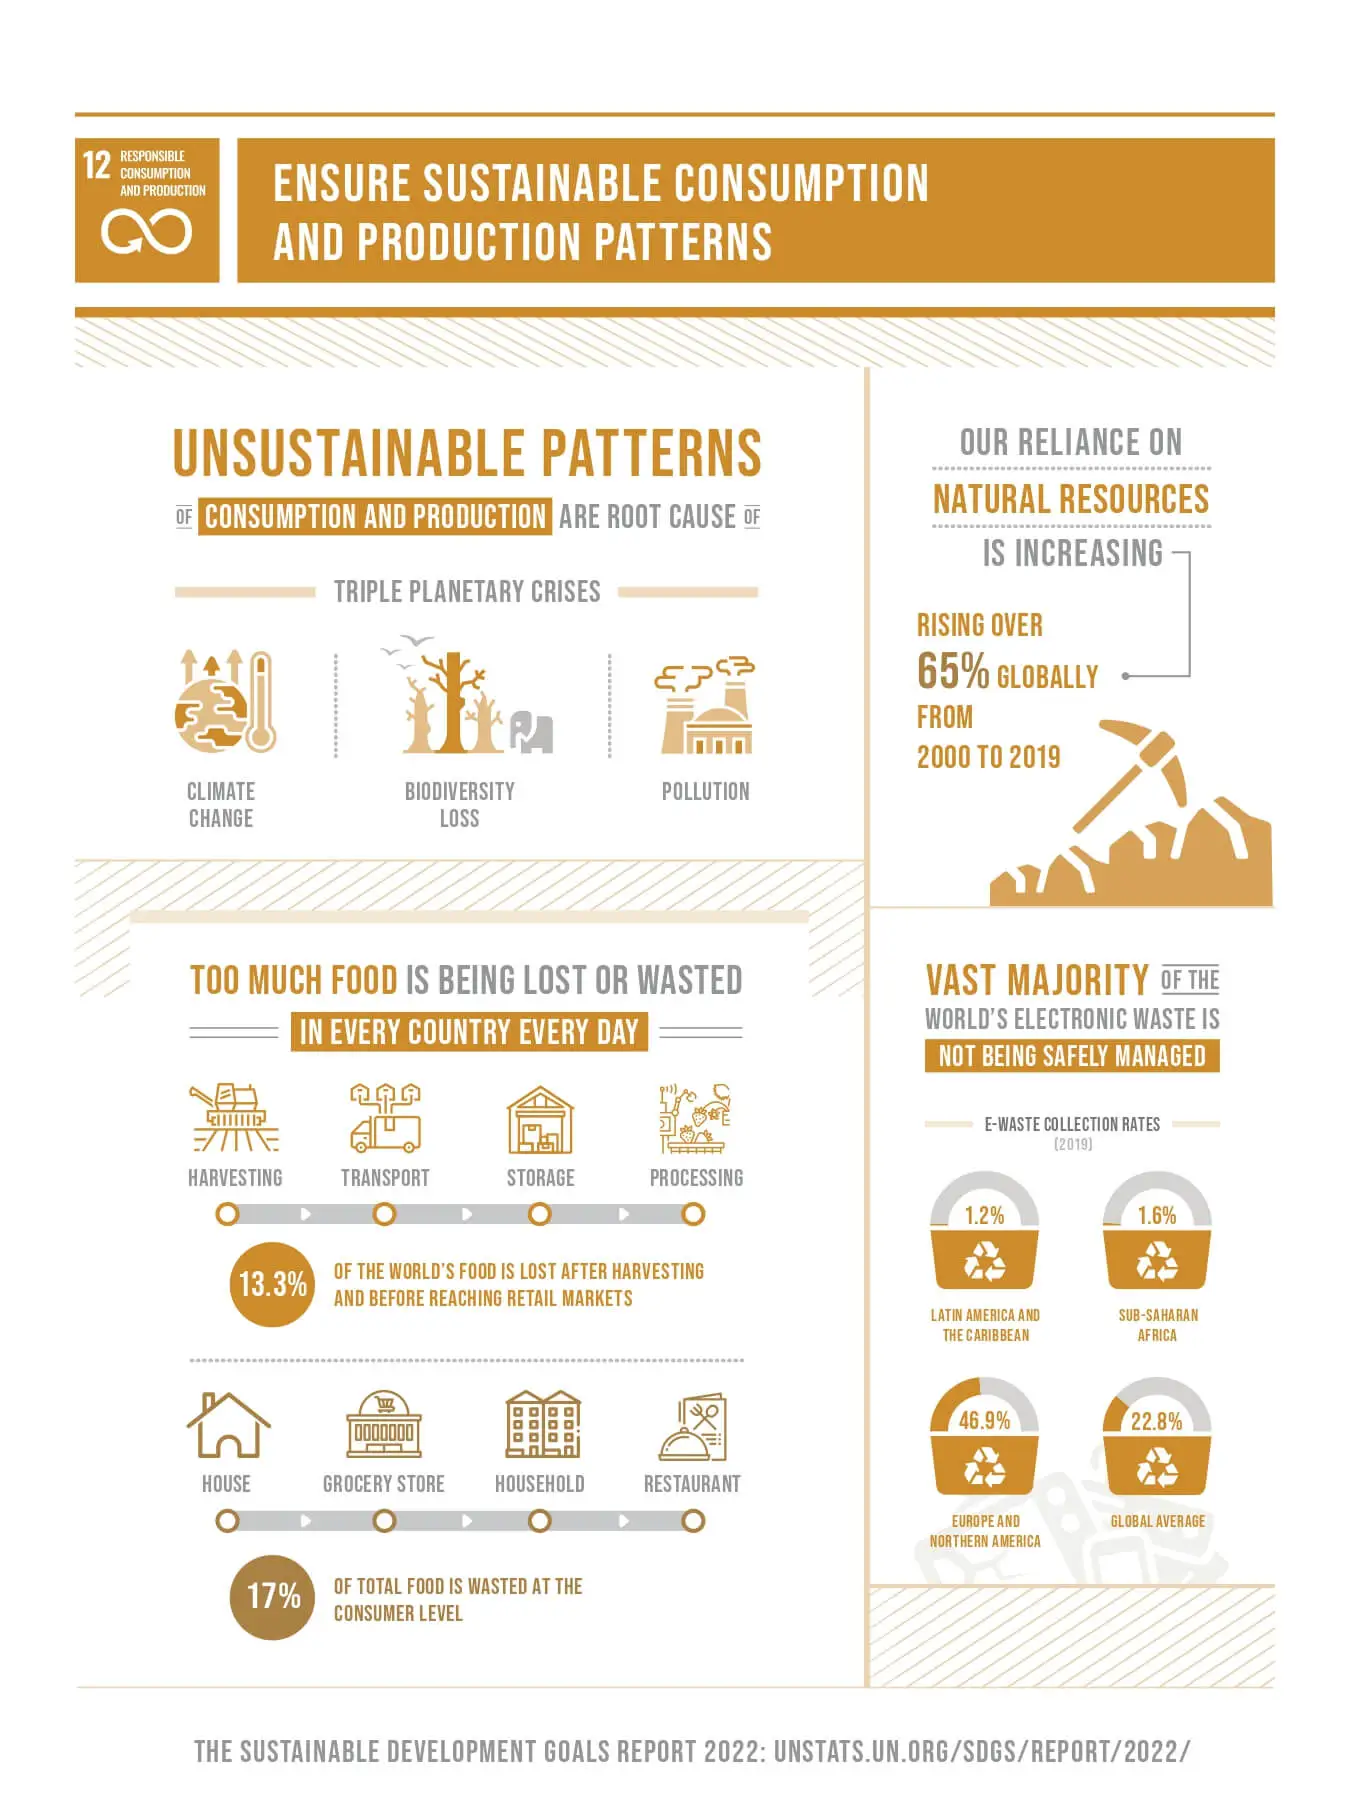 Sustainable Consumption and production patterns report 2022